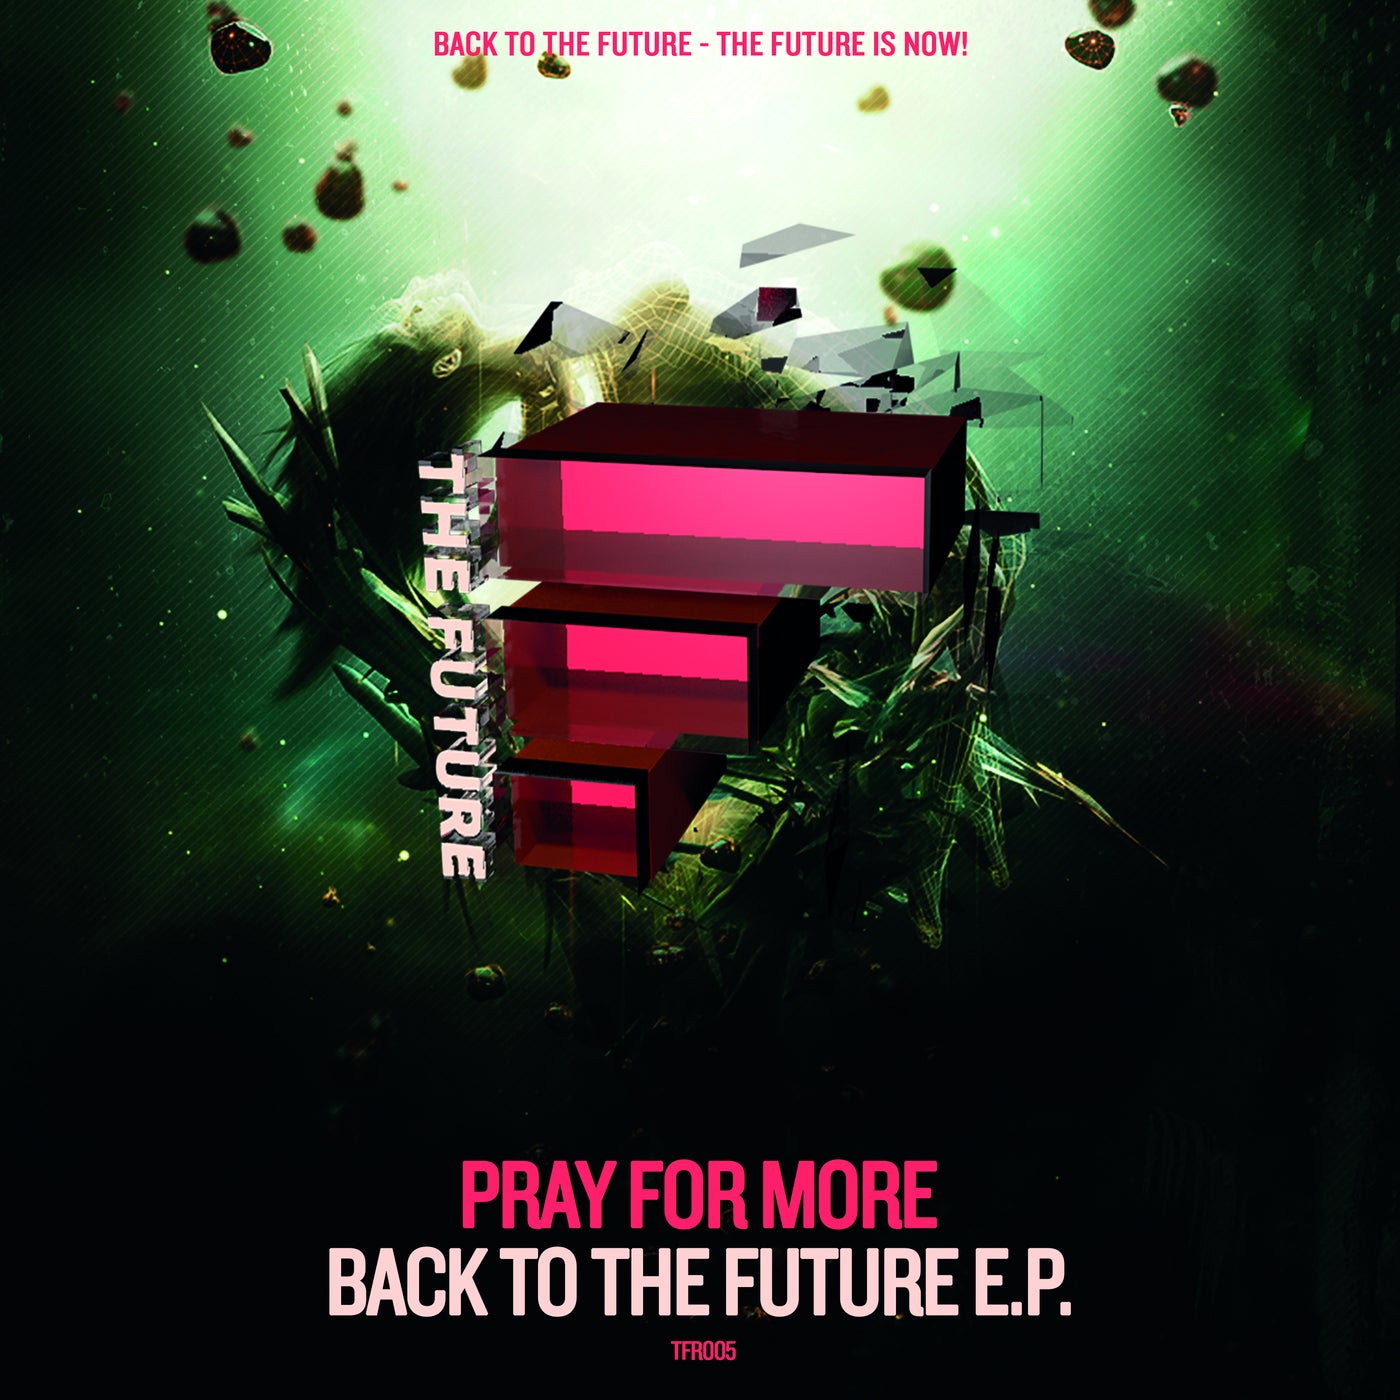 Pray For More - BACK TO THE FUTURE E.P. [TFID005]